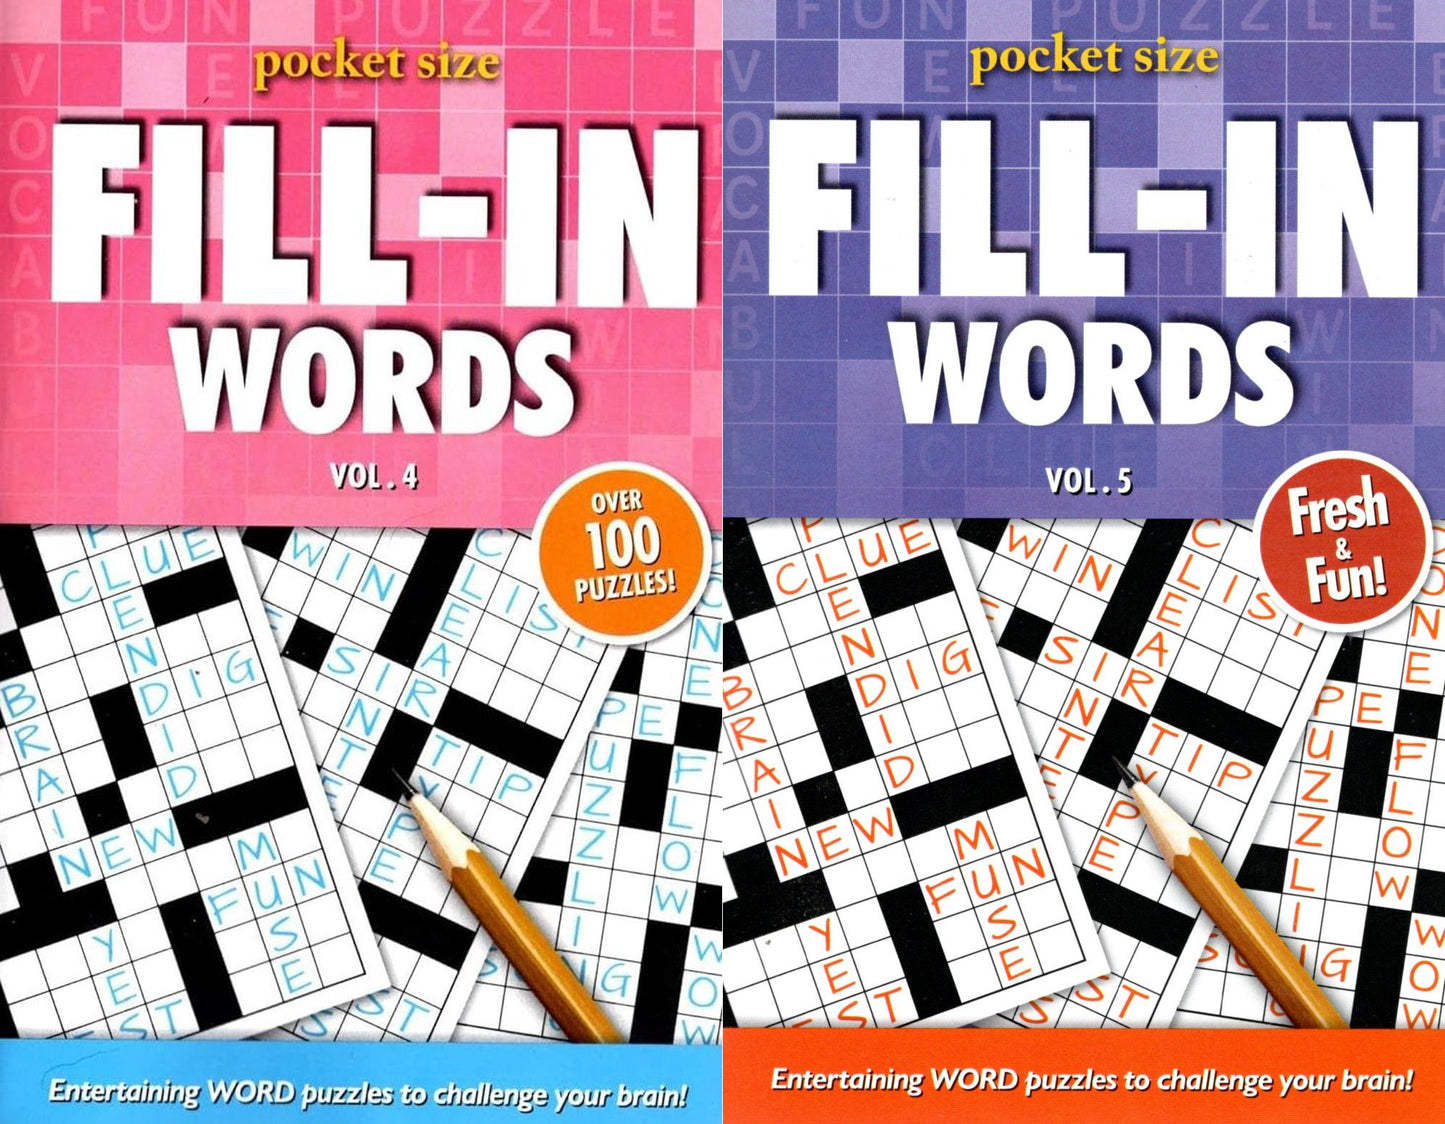 Fill in Words - Sharpen Your Memory, Boost Your Brain (Pocket Size) - Vol.4 - 5